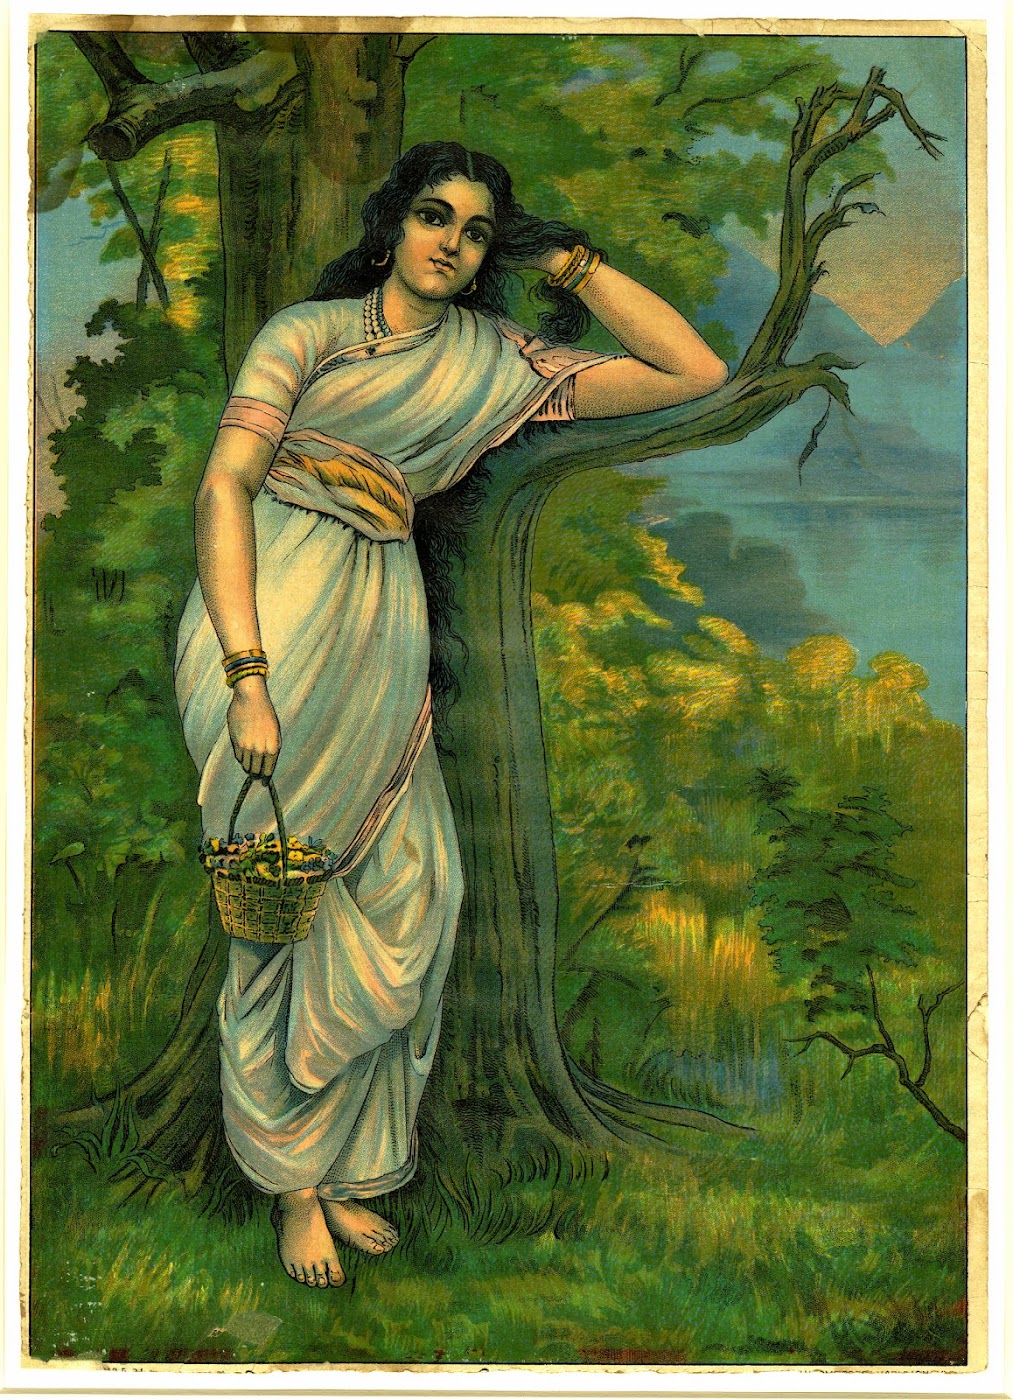 Colour Lithograph of a Woman with Flower Basket Leaning against a Tree - Early 20th Century